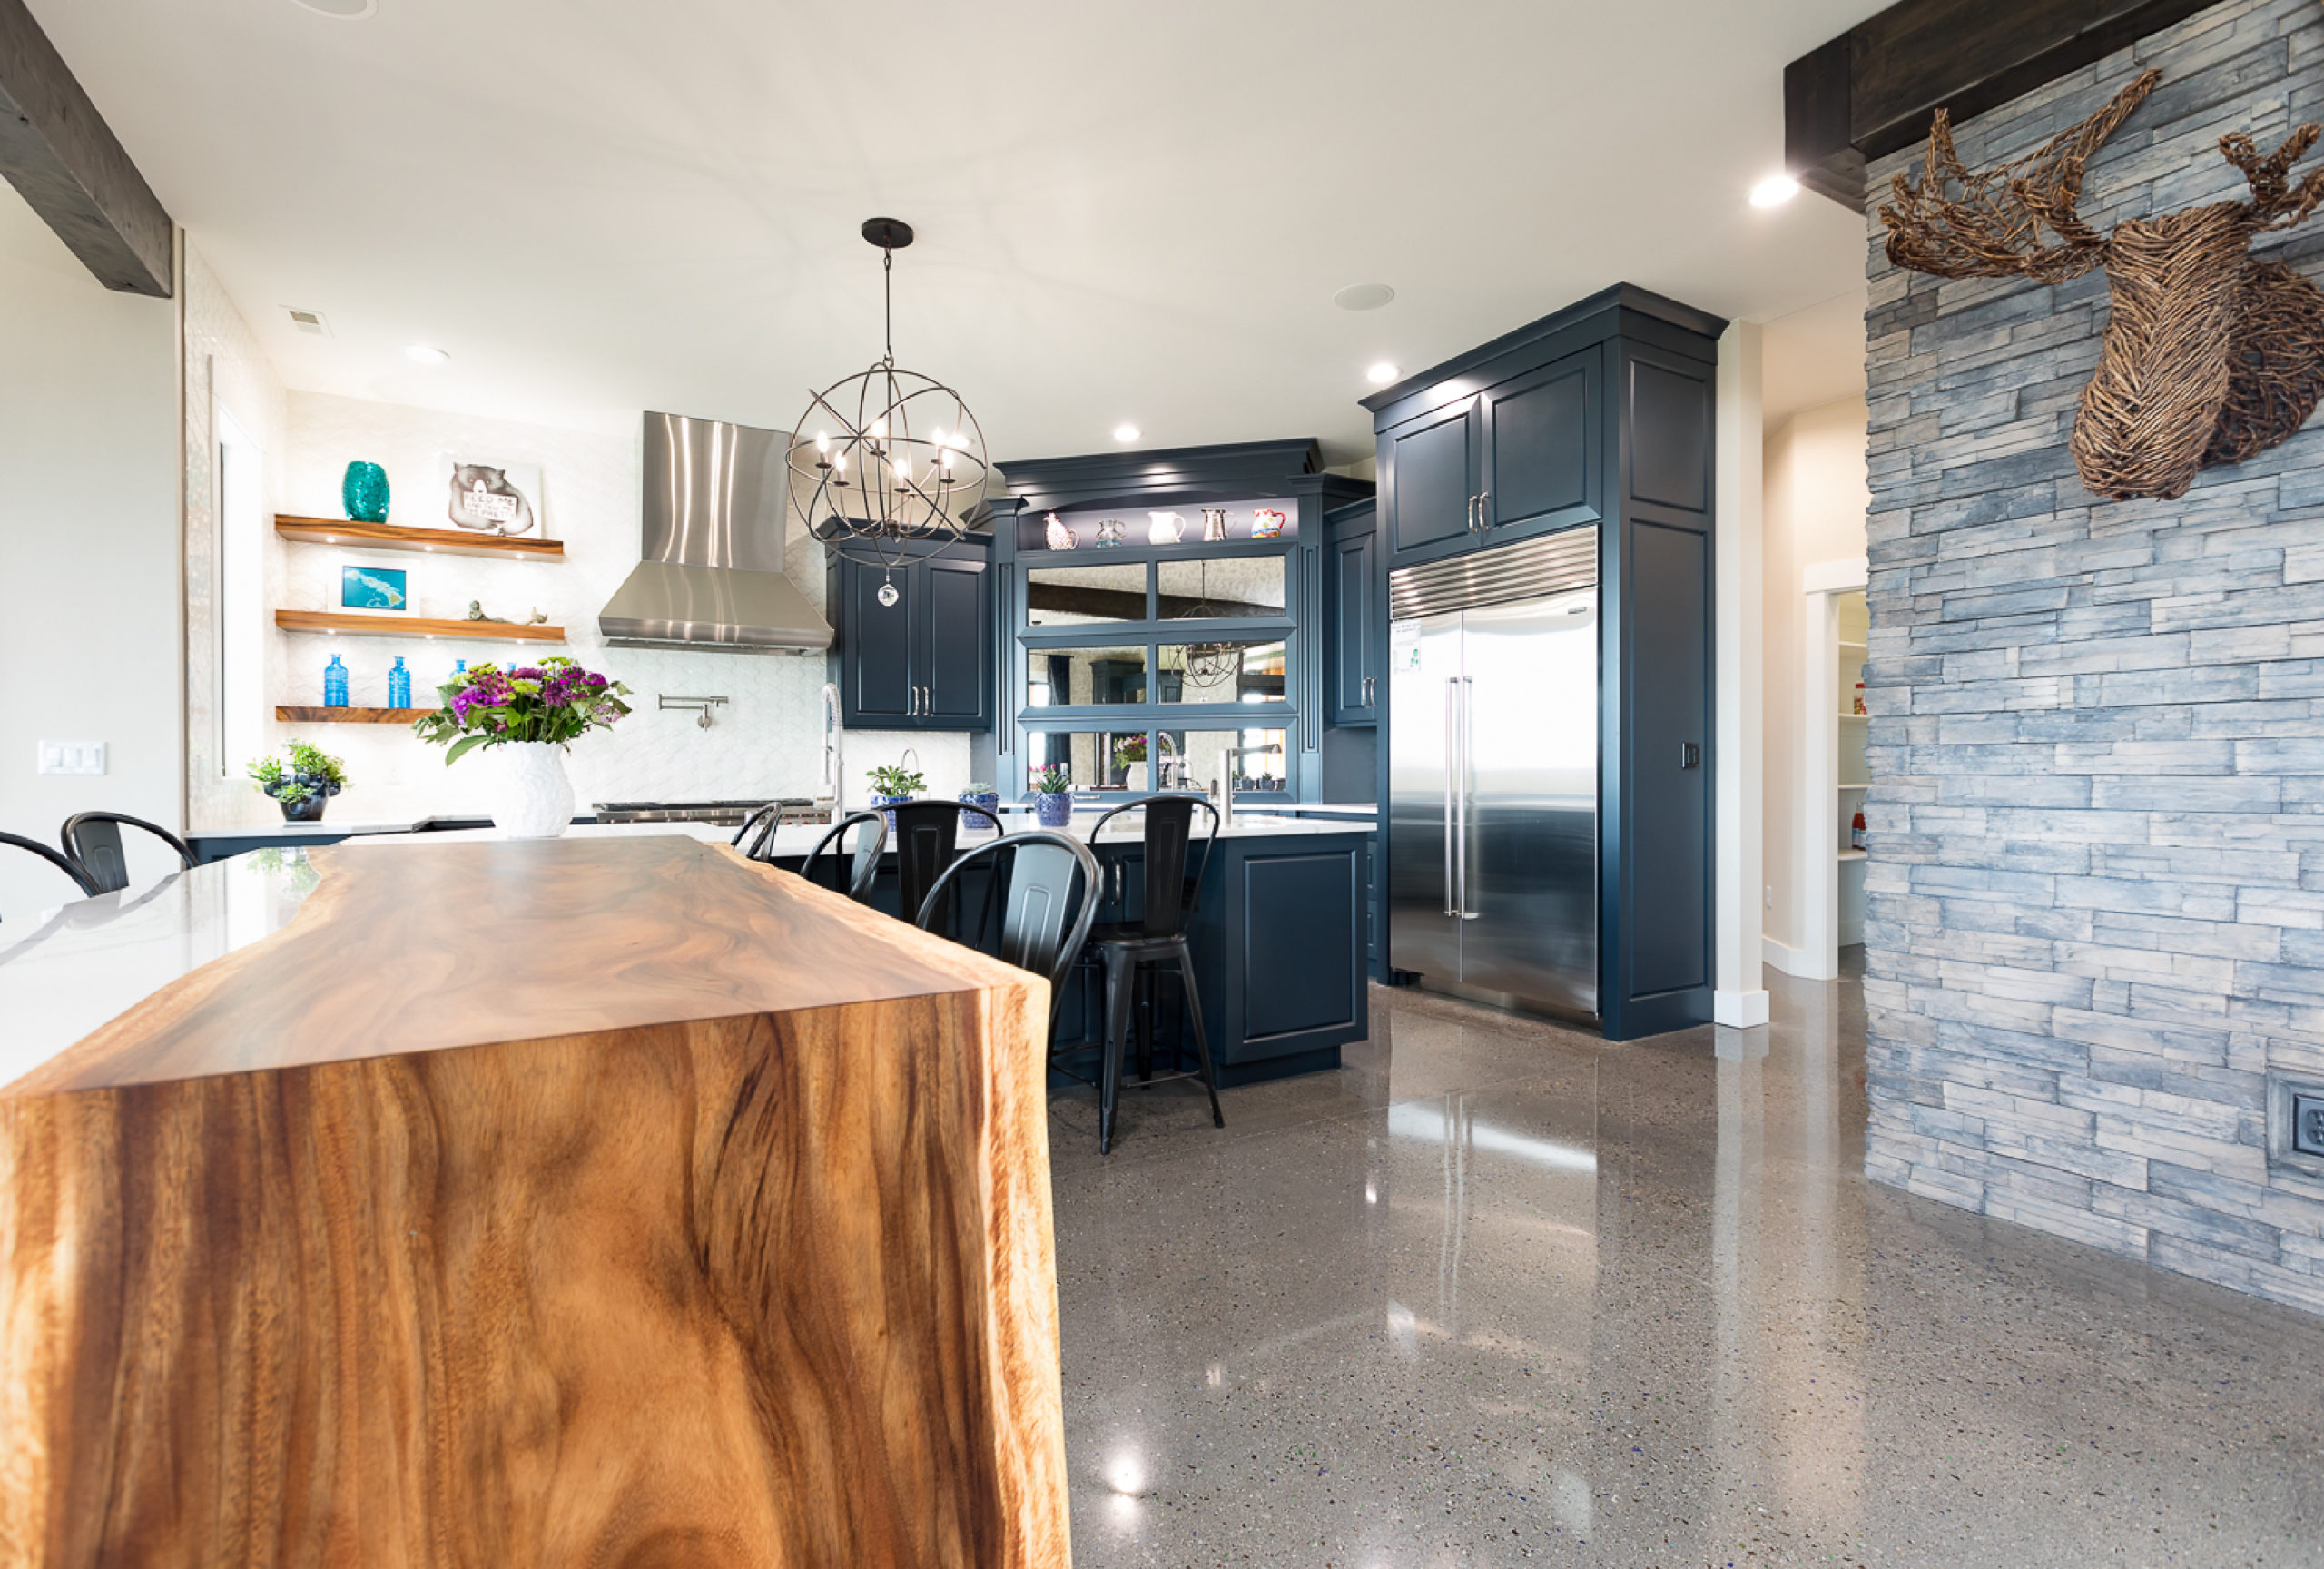 Navy blue kitchen designed by Ban Construction with wooden island